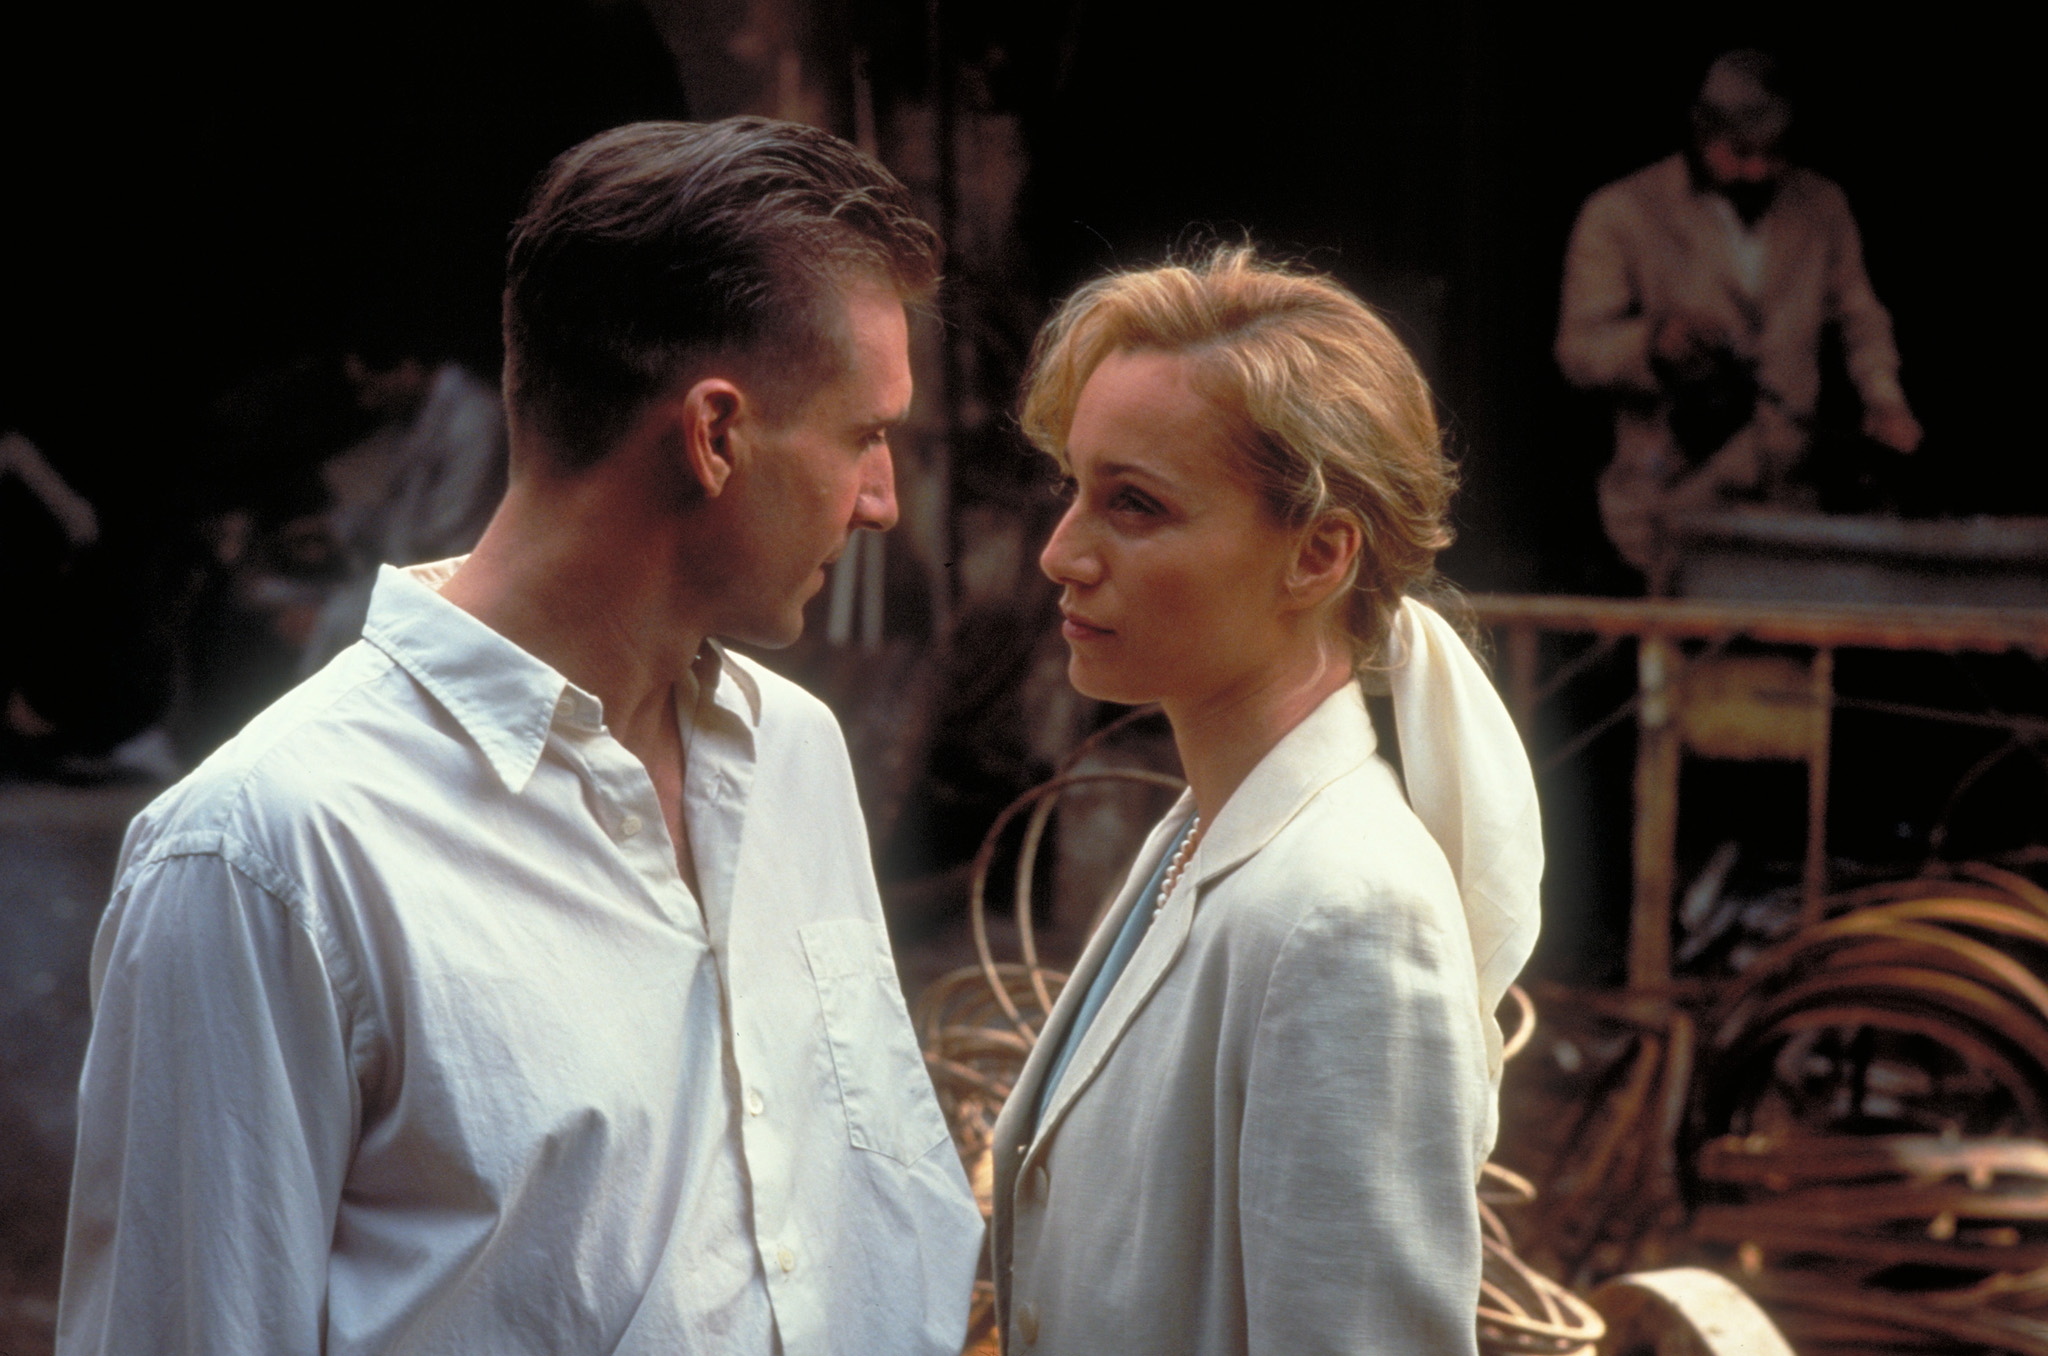 the english patient movie reviews